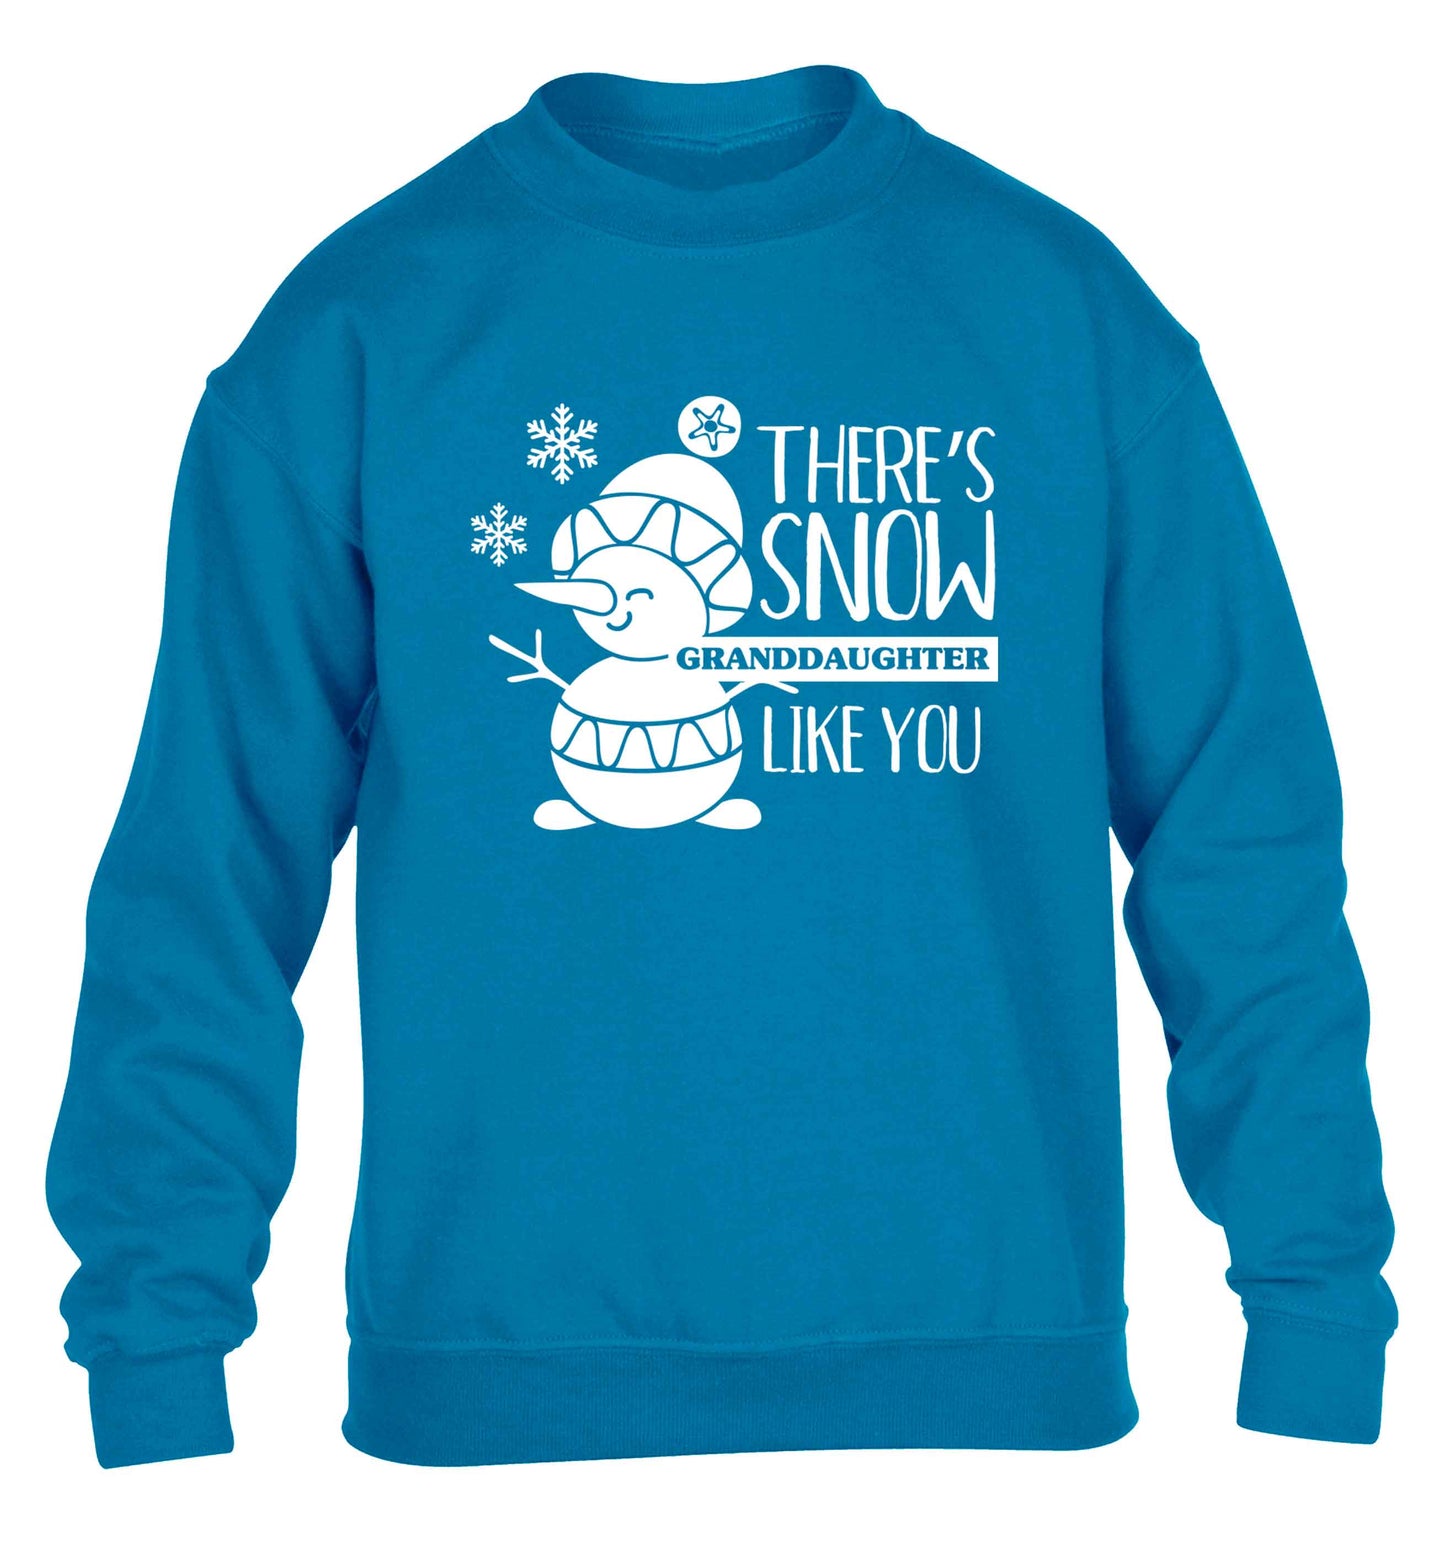 There's snow granddaughter like you children's blue sweater 12-13 Years